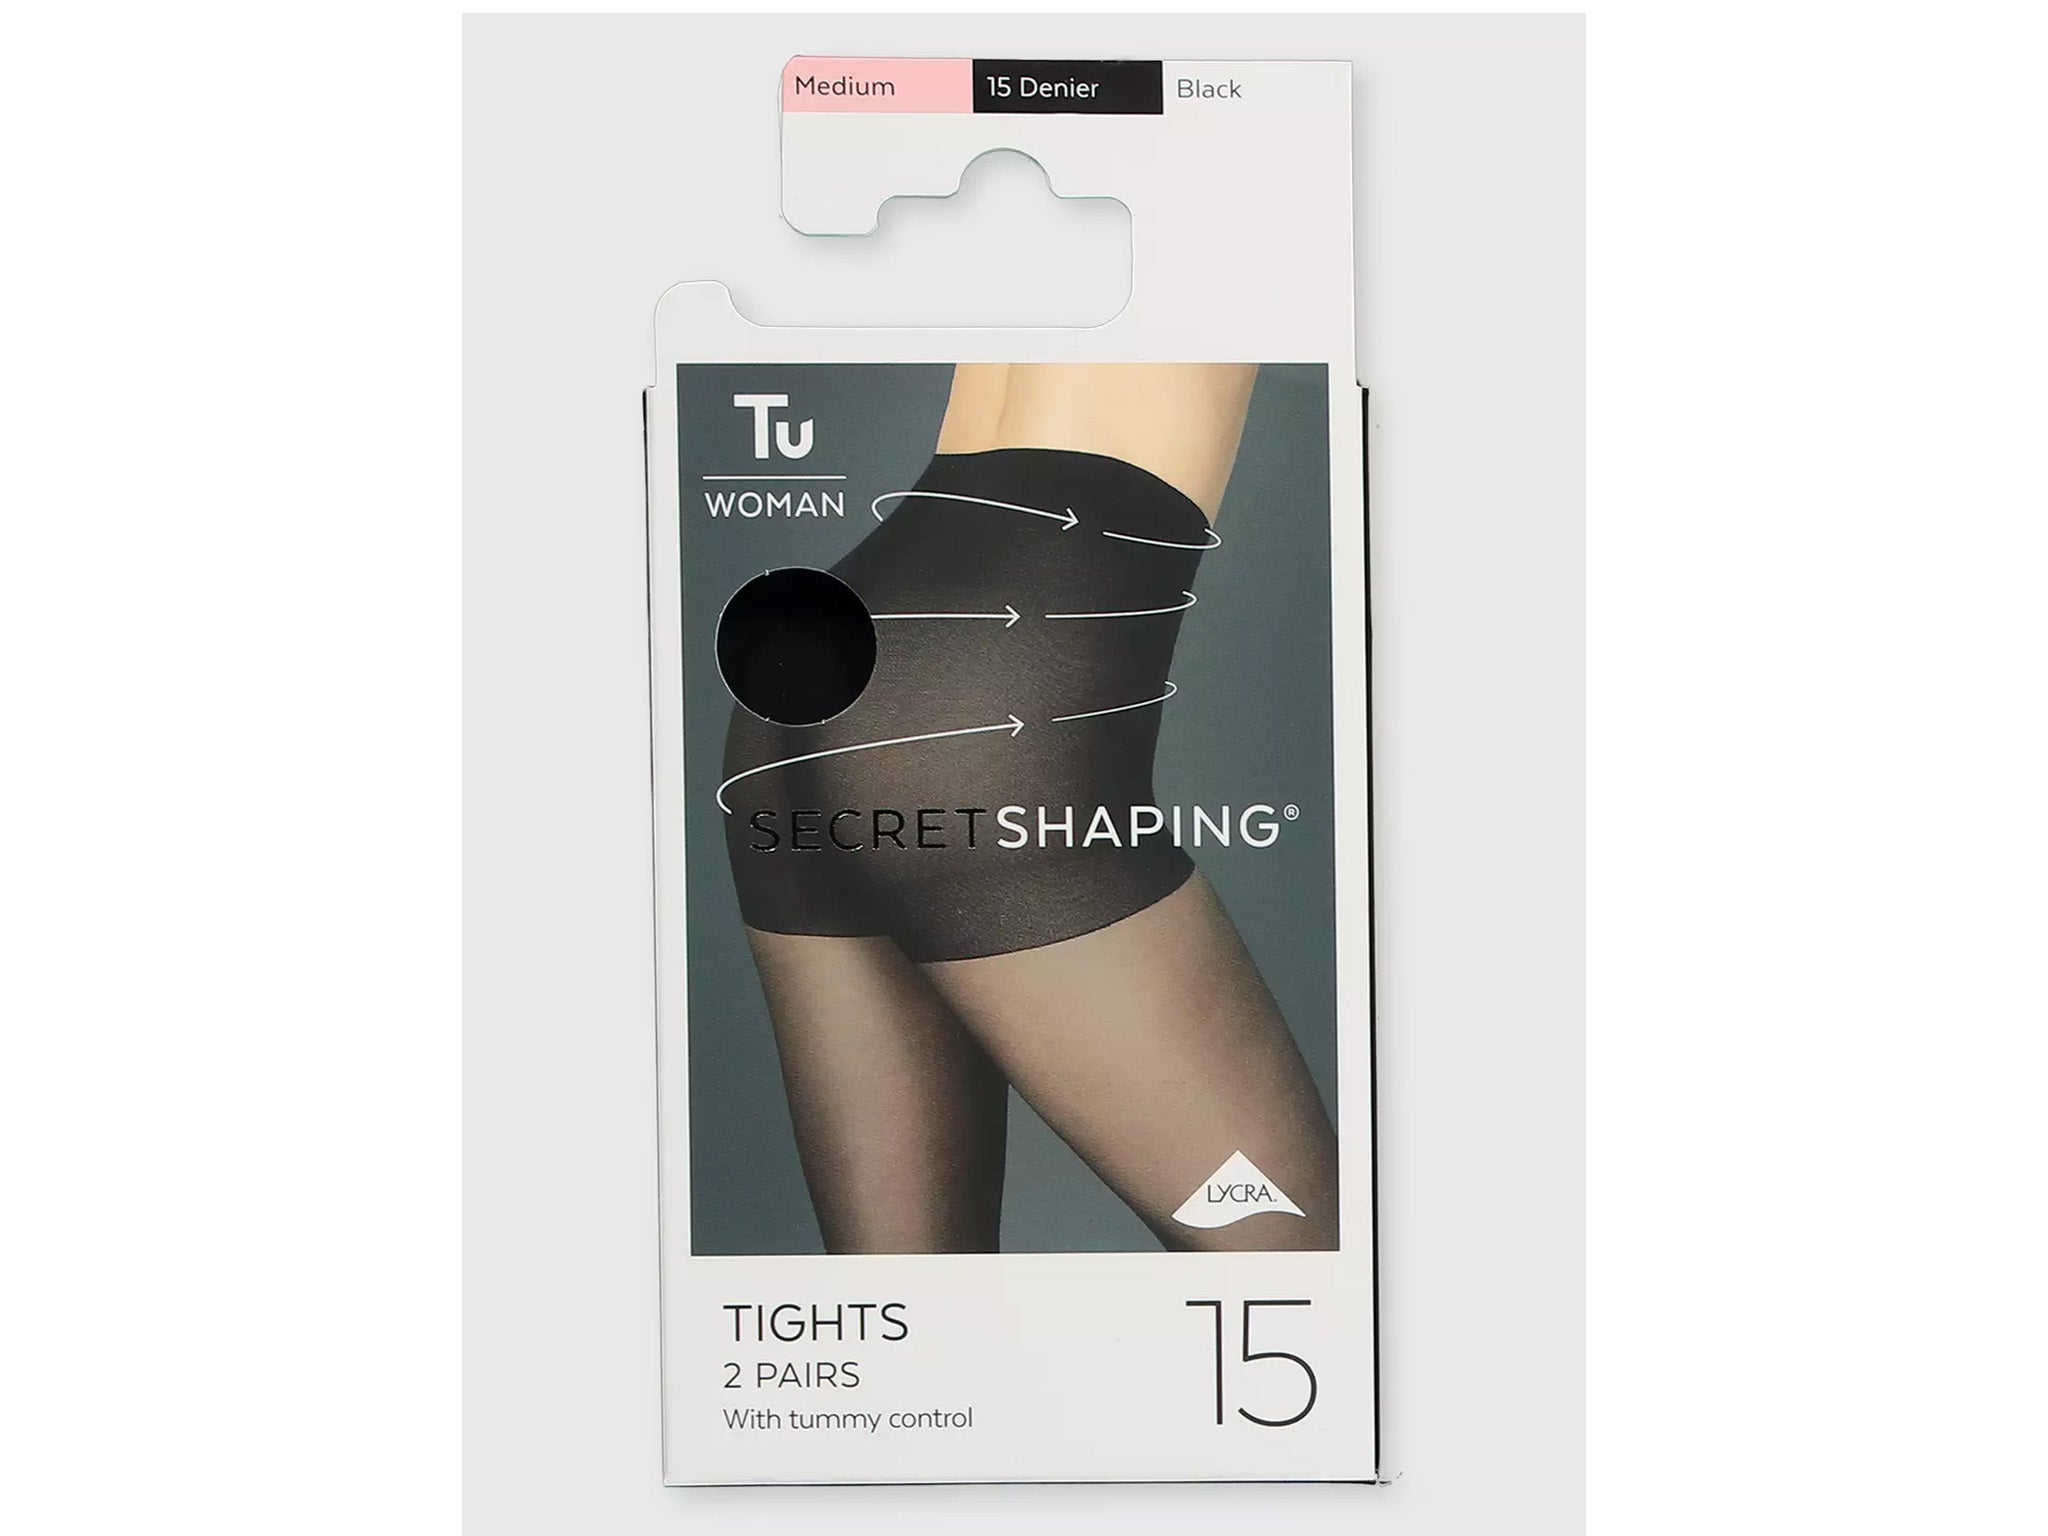 Best body shaping tights for women